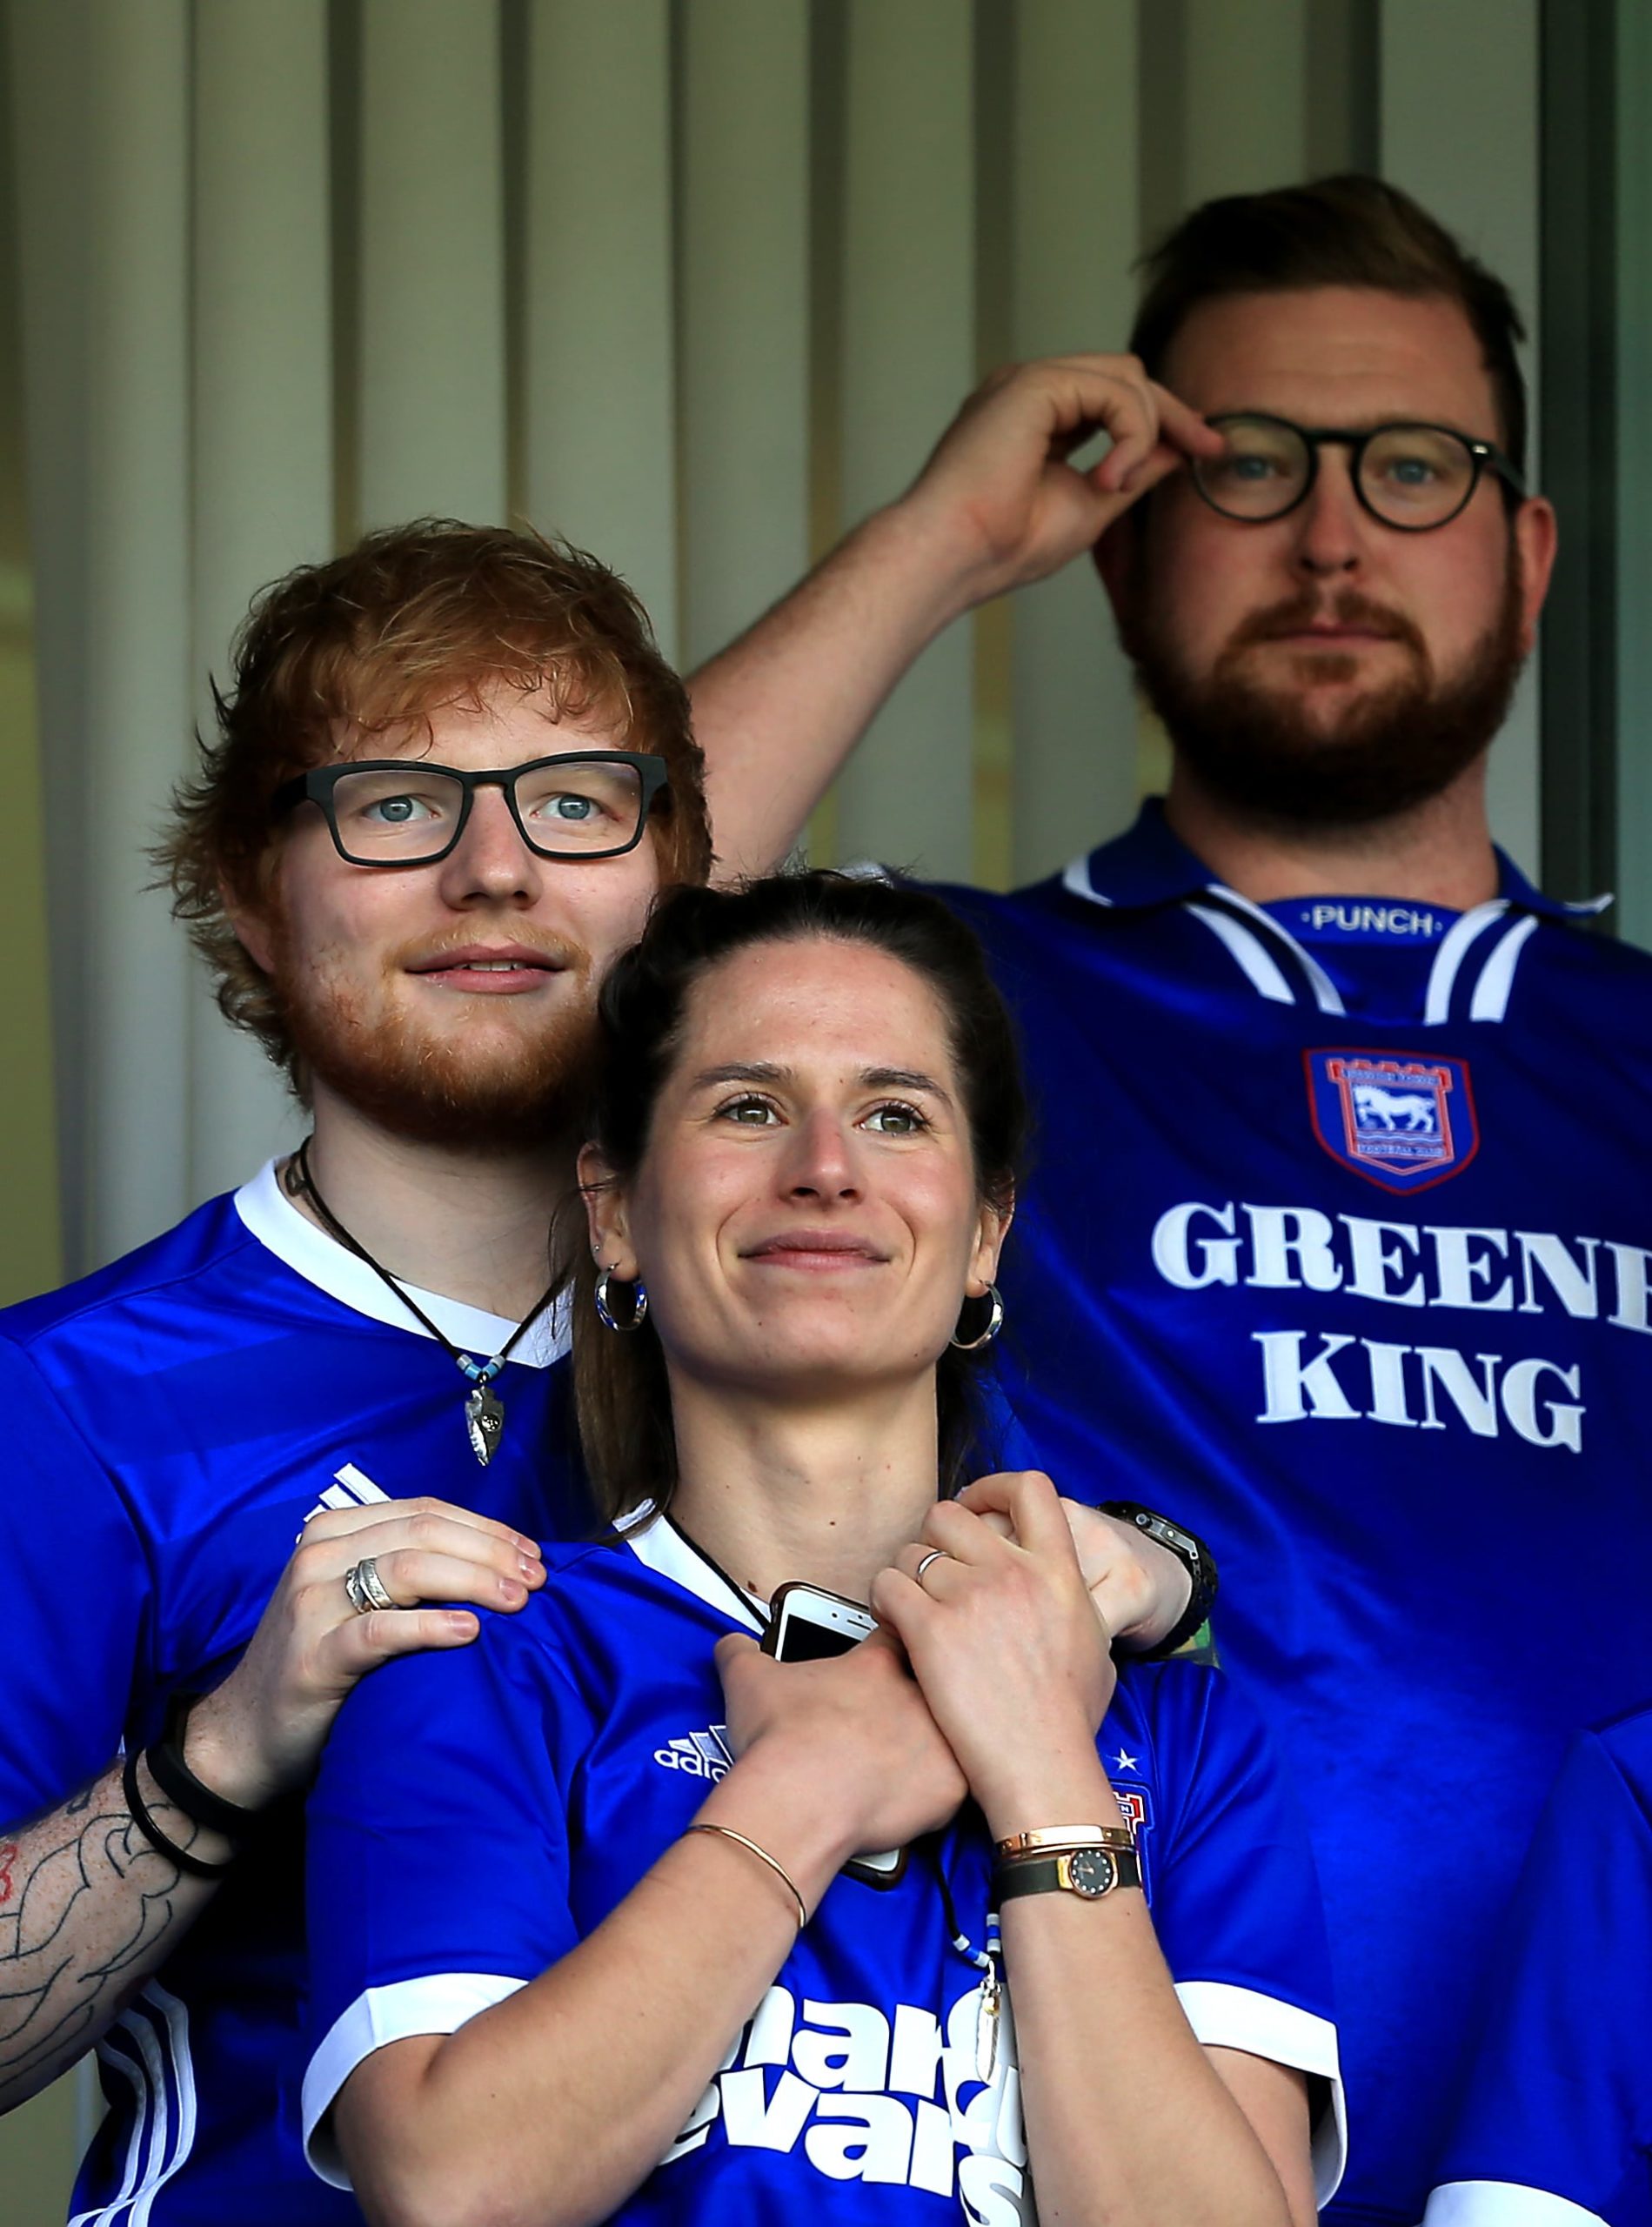 IPSWICH, ENGLAND - APRIL 21:  Musician Ed Sheeran and fiance Cherry Seaborn look on during the Sky Bet Championship match between Ipswich Town and Aston Villa at Portman Road on April 21, 2018 in Ipswich, England. (Photo by Stephen Pond/Getty Images)